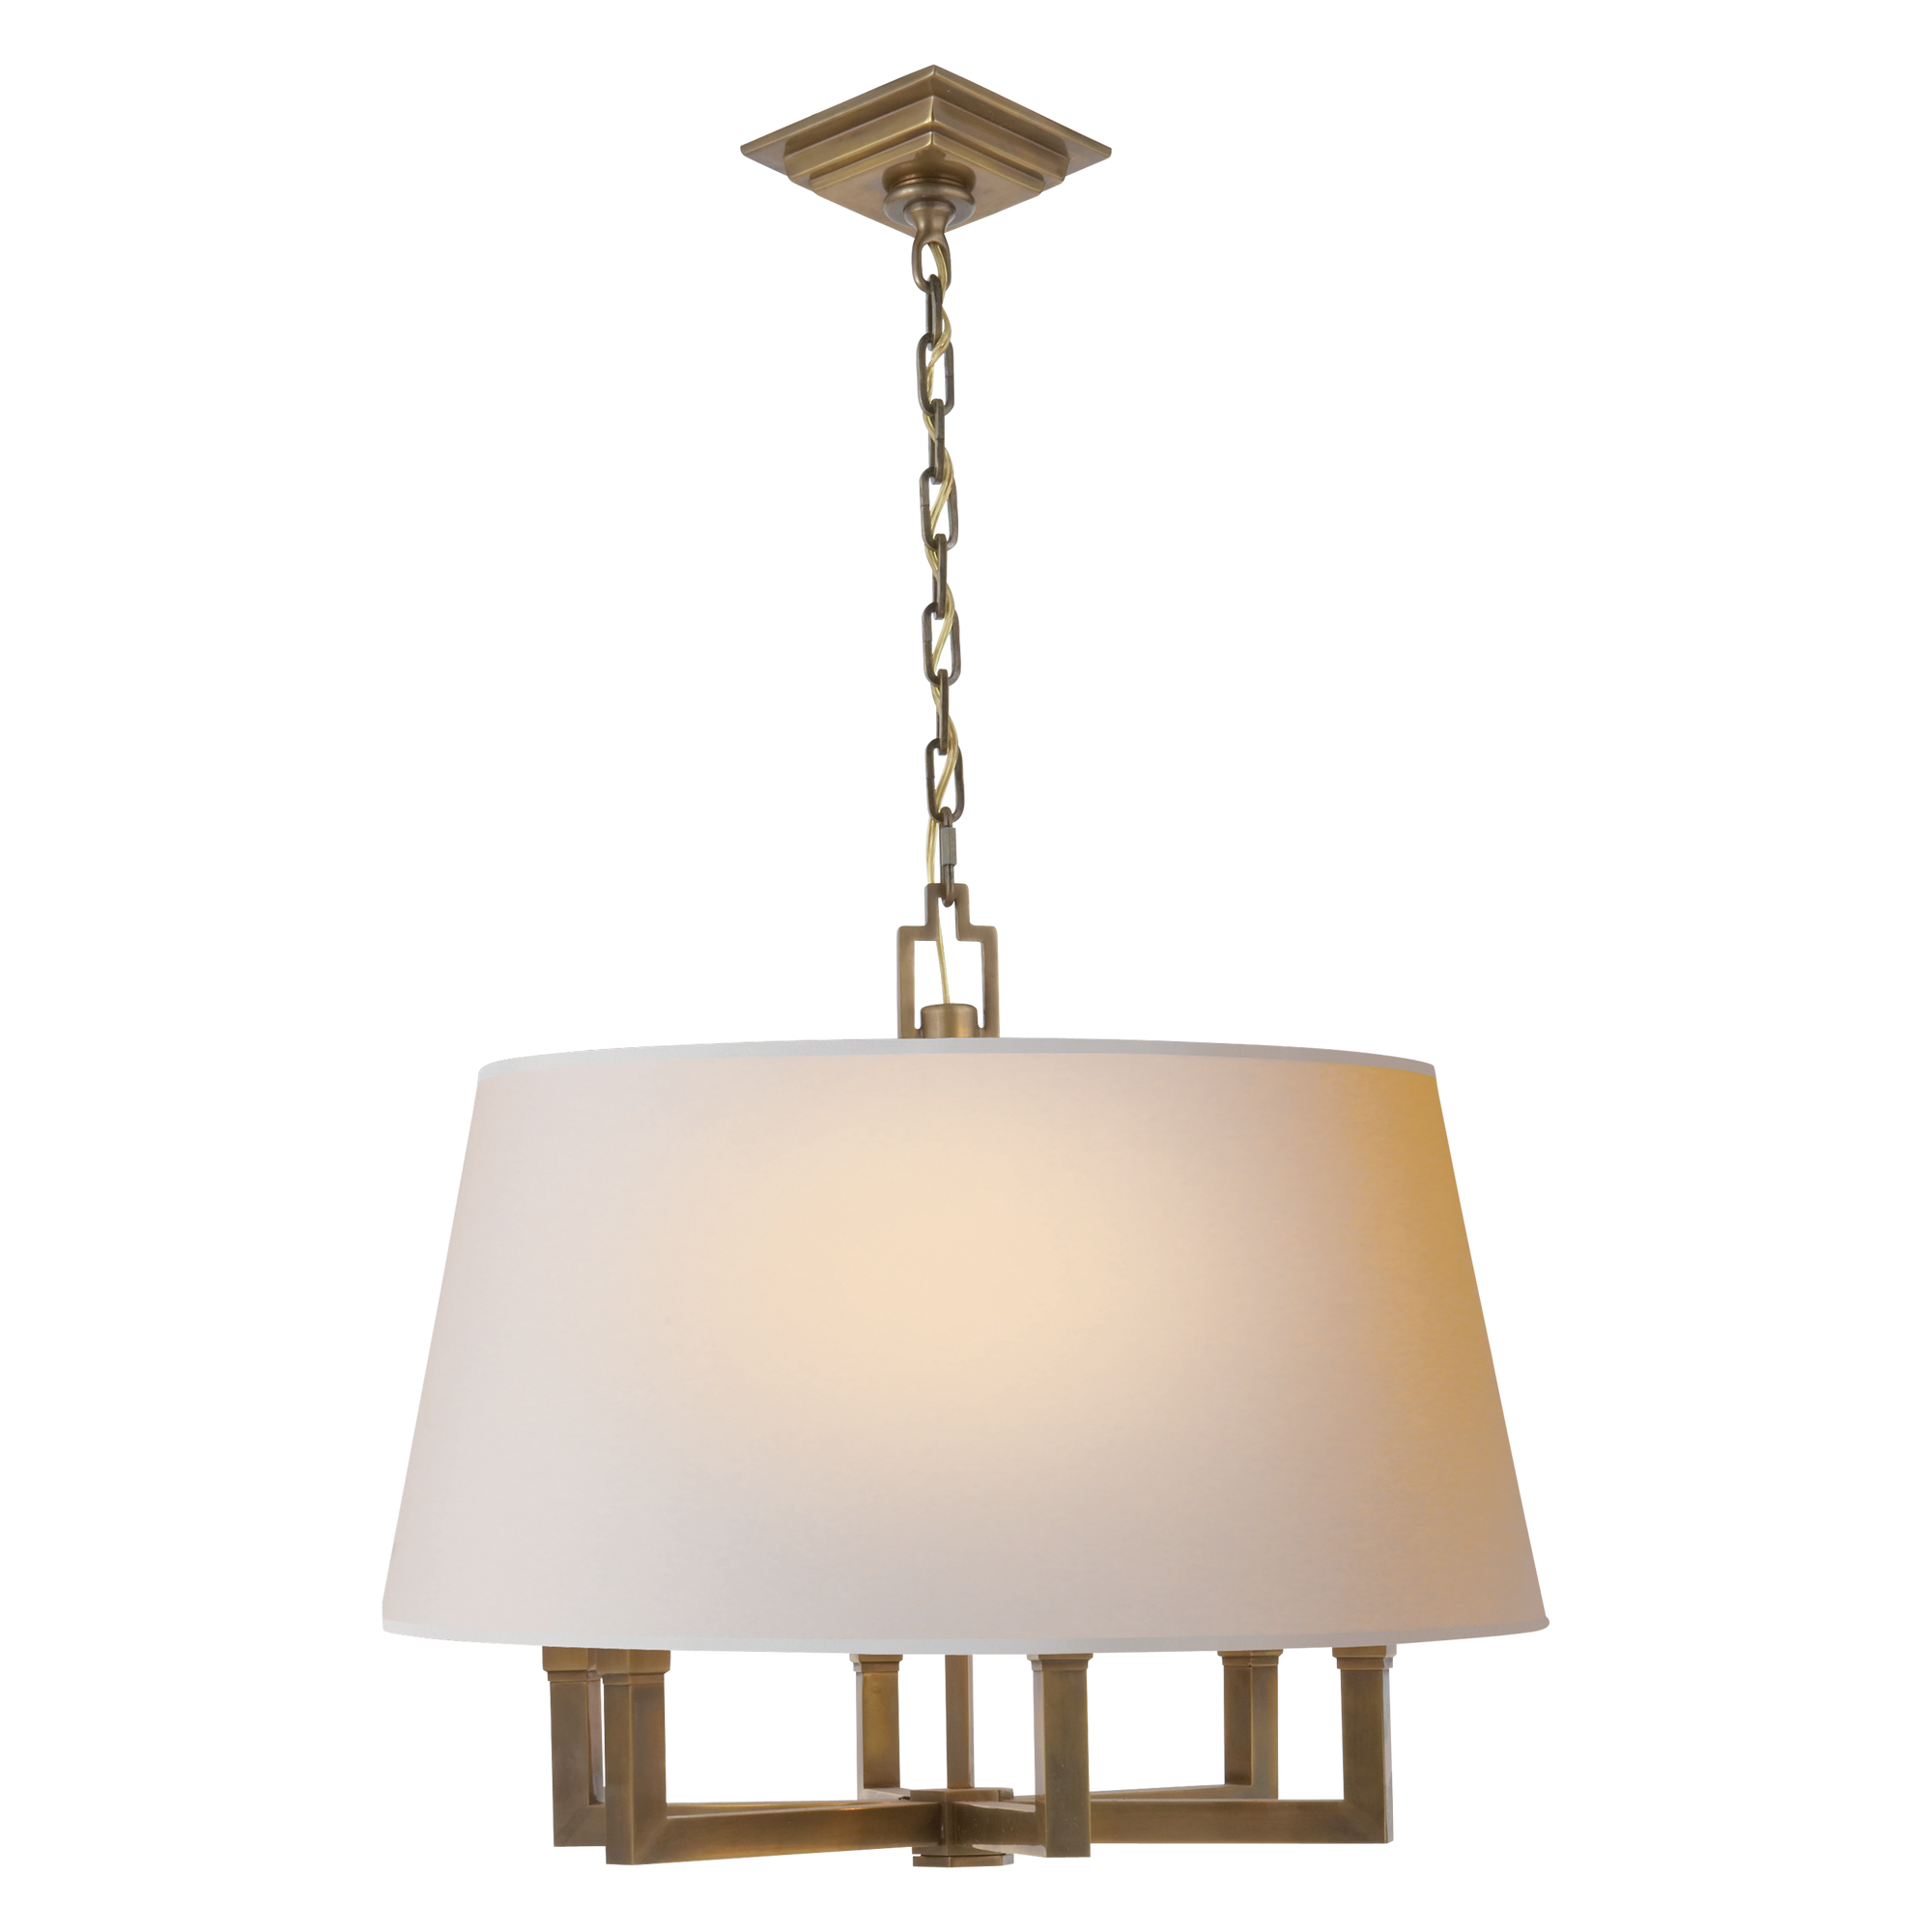 Hand-rubbed antique brass fixture with a natural paper shade.